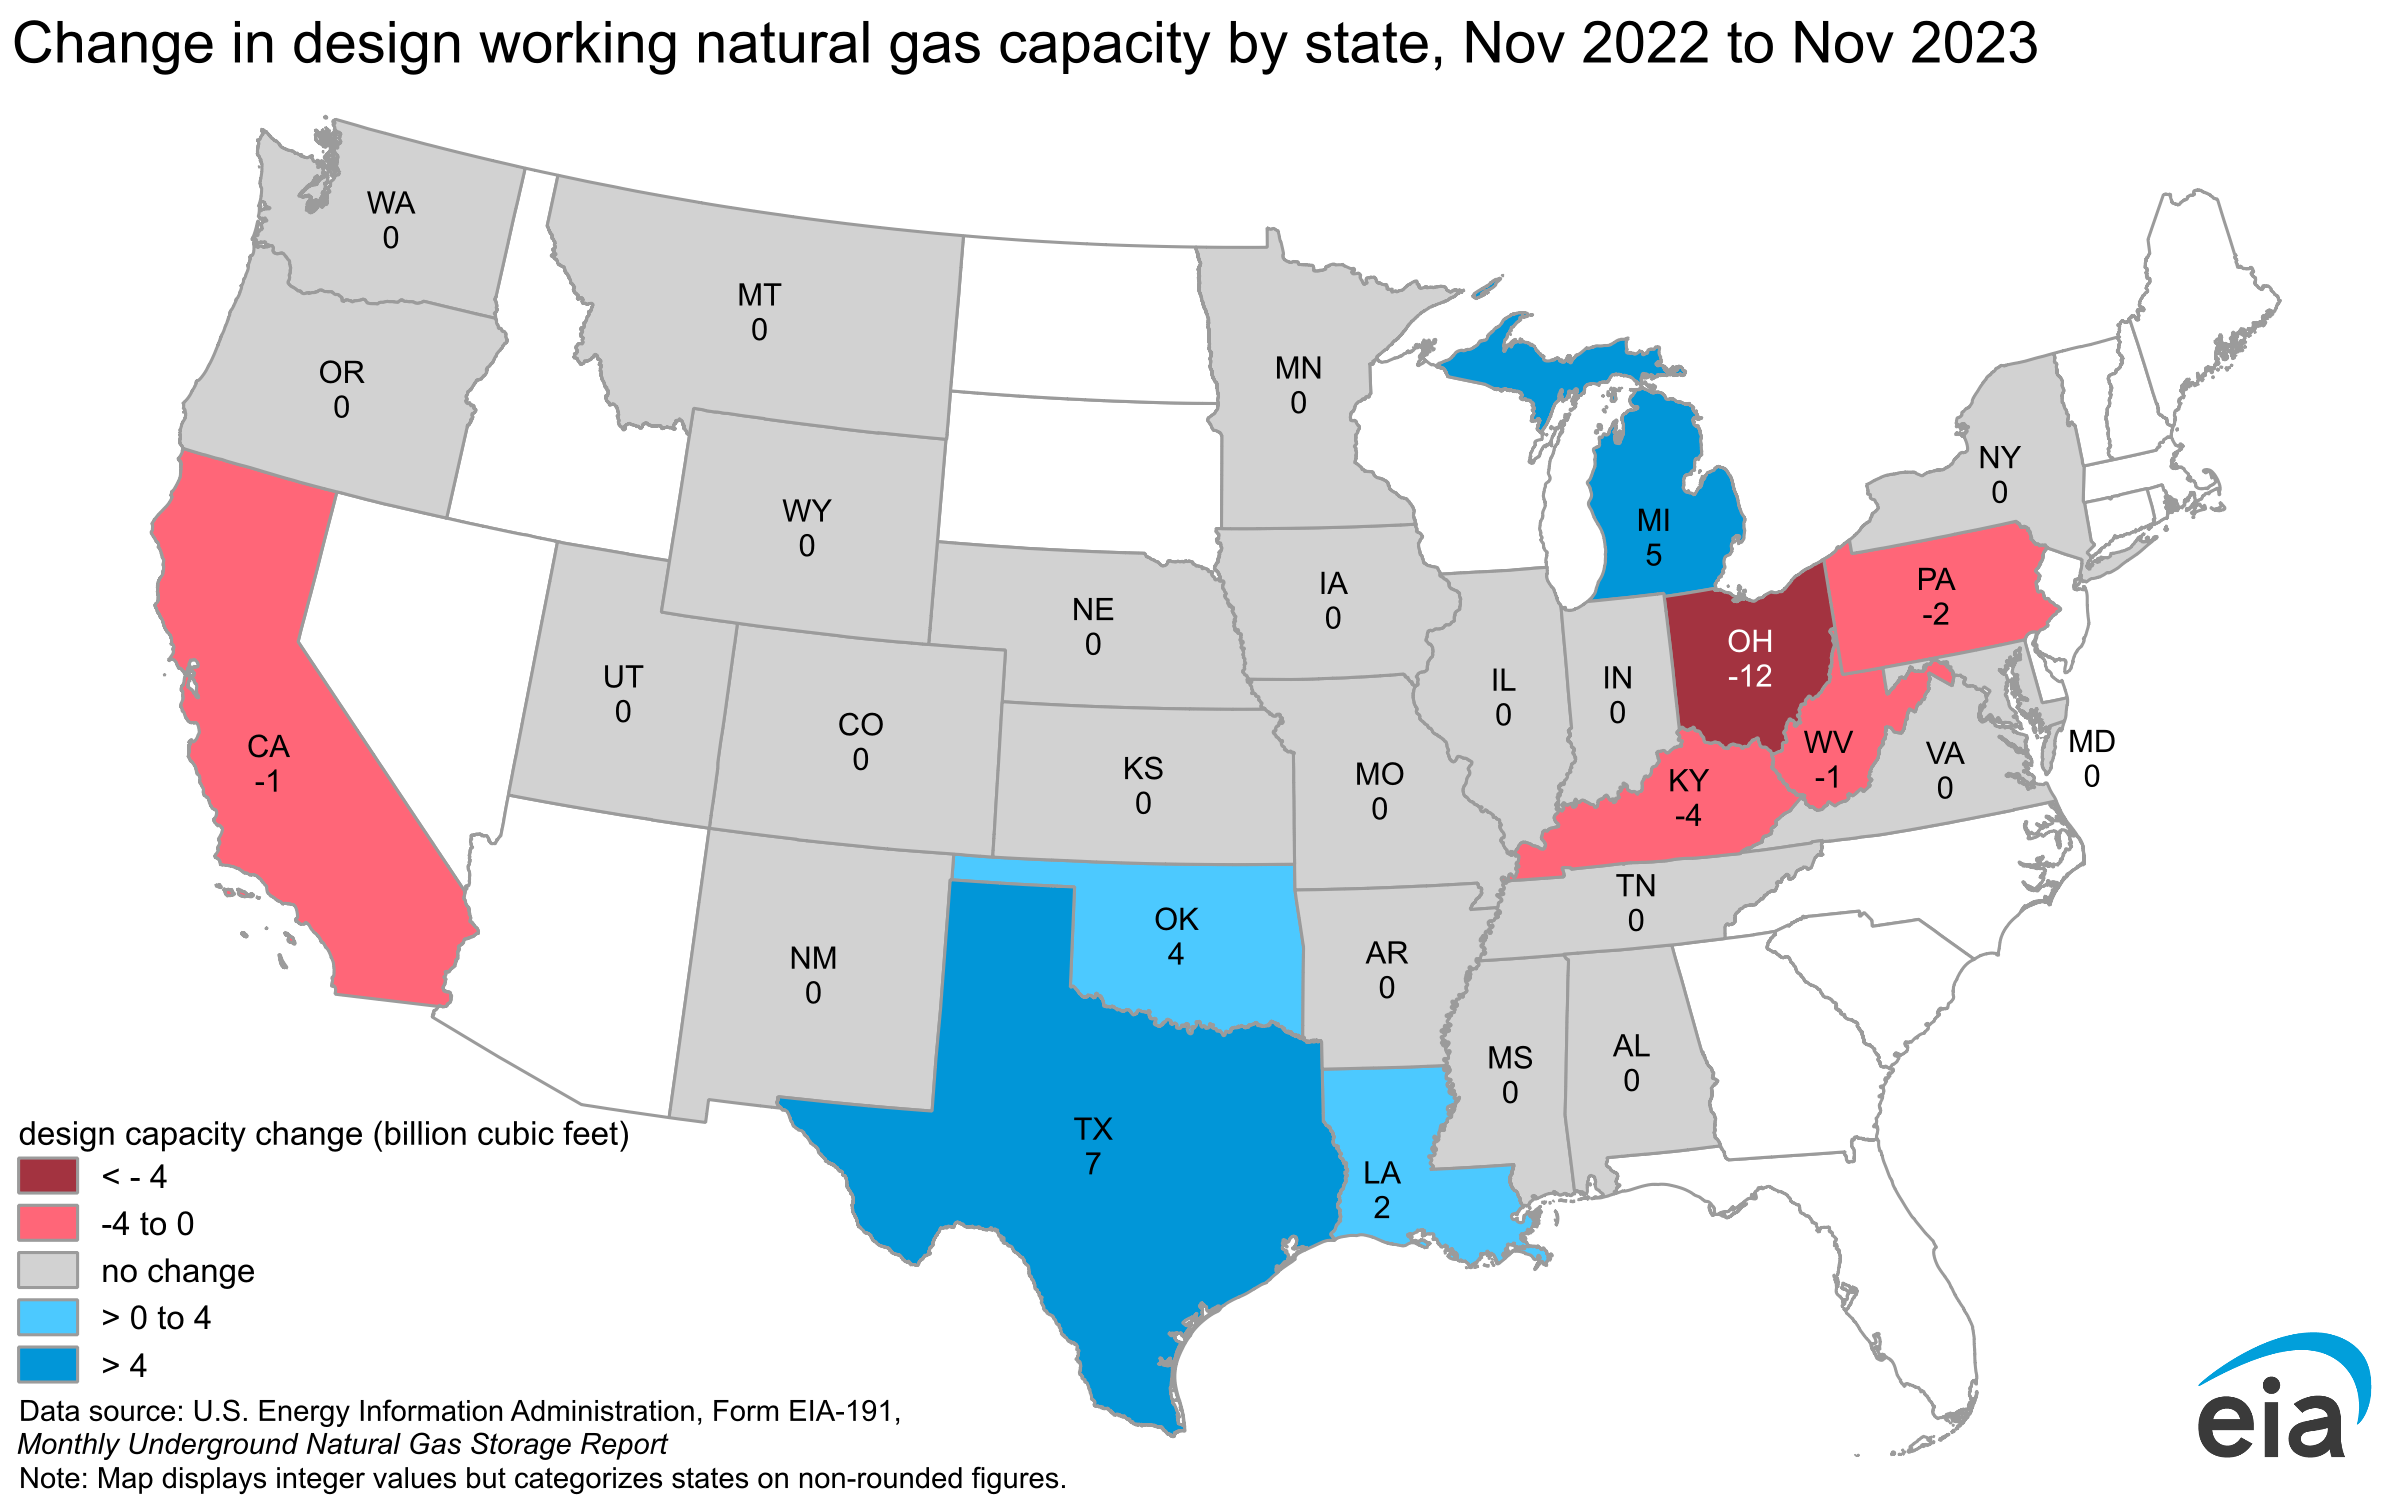 Change in design working natural gas capacity by state, Nov 2022 to Nov 2023